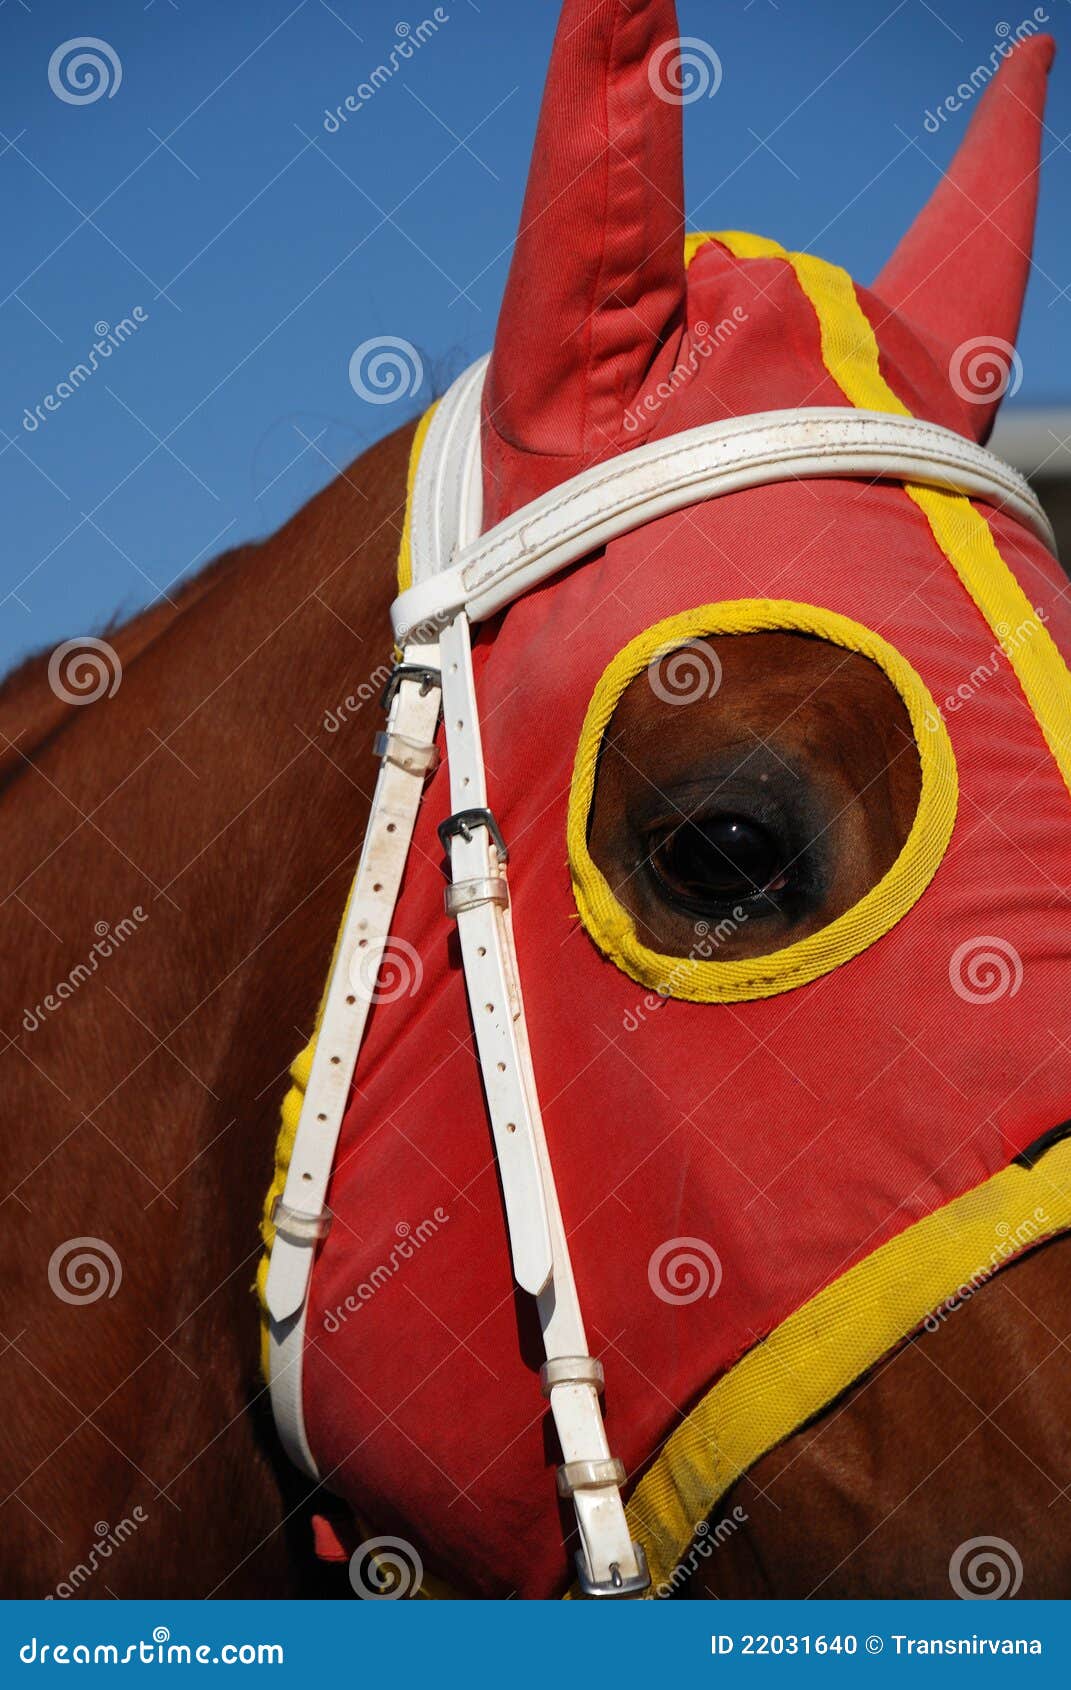 clipart horse with blinders - photo #8